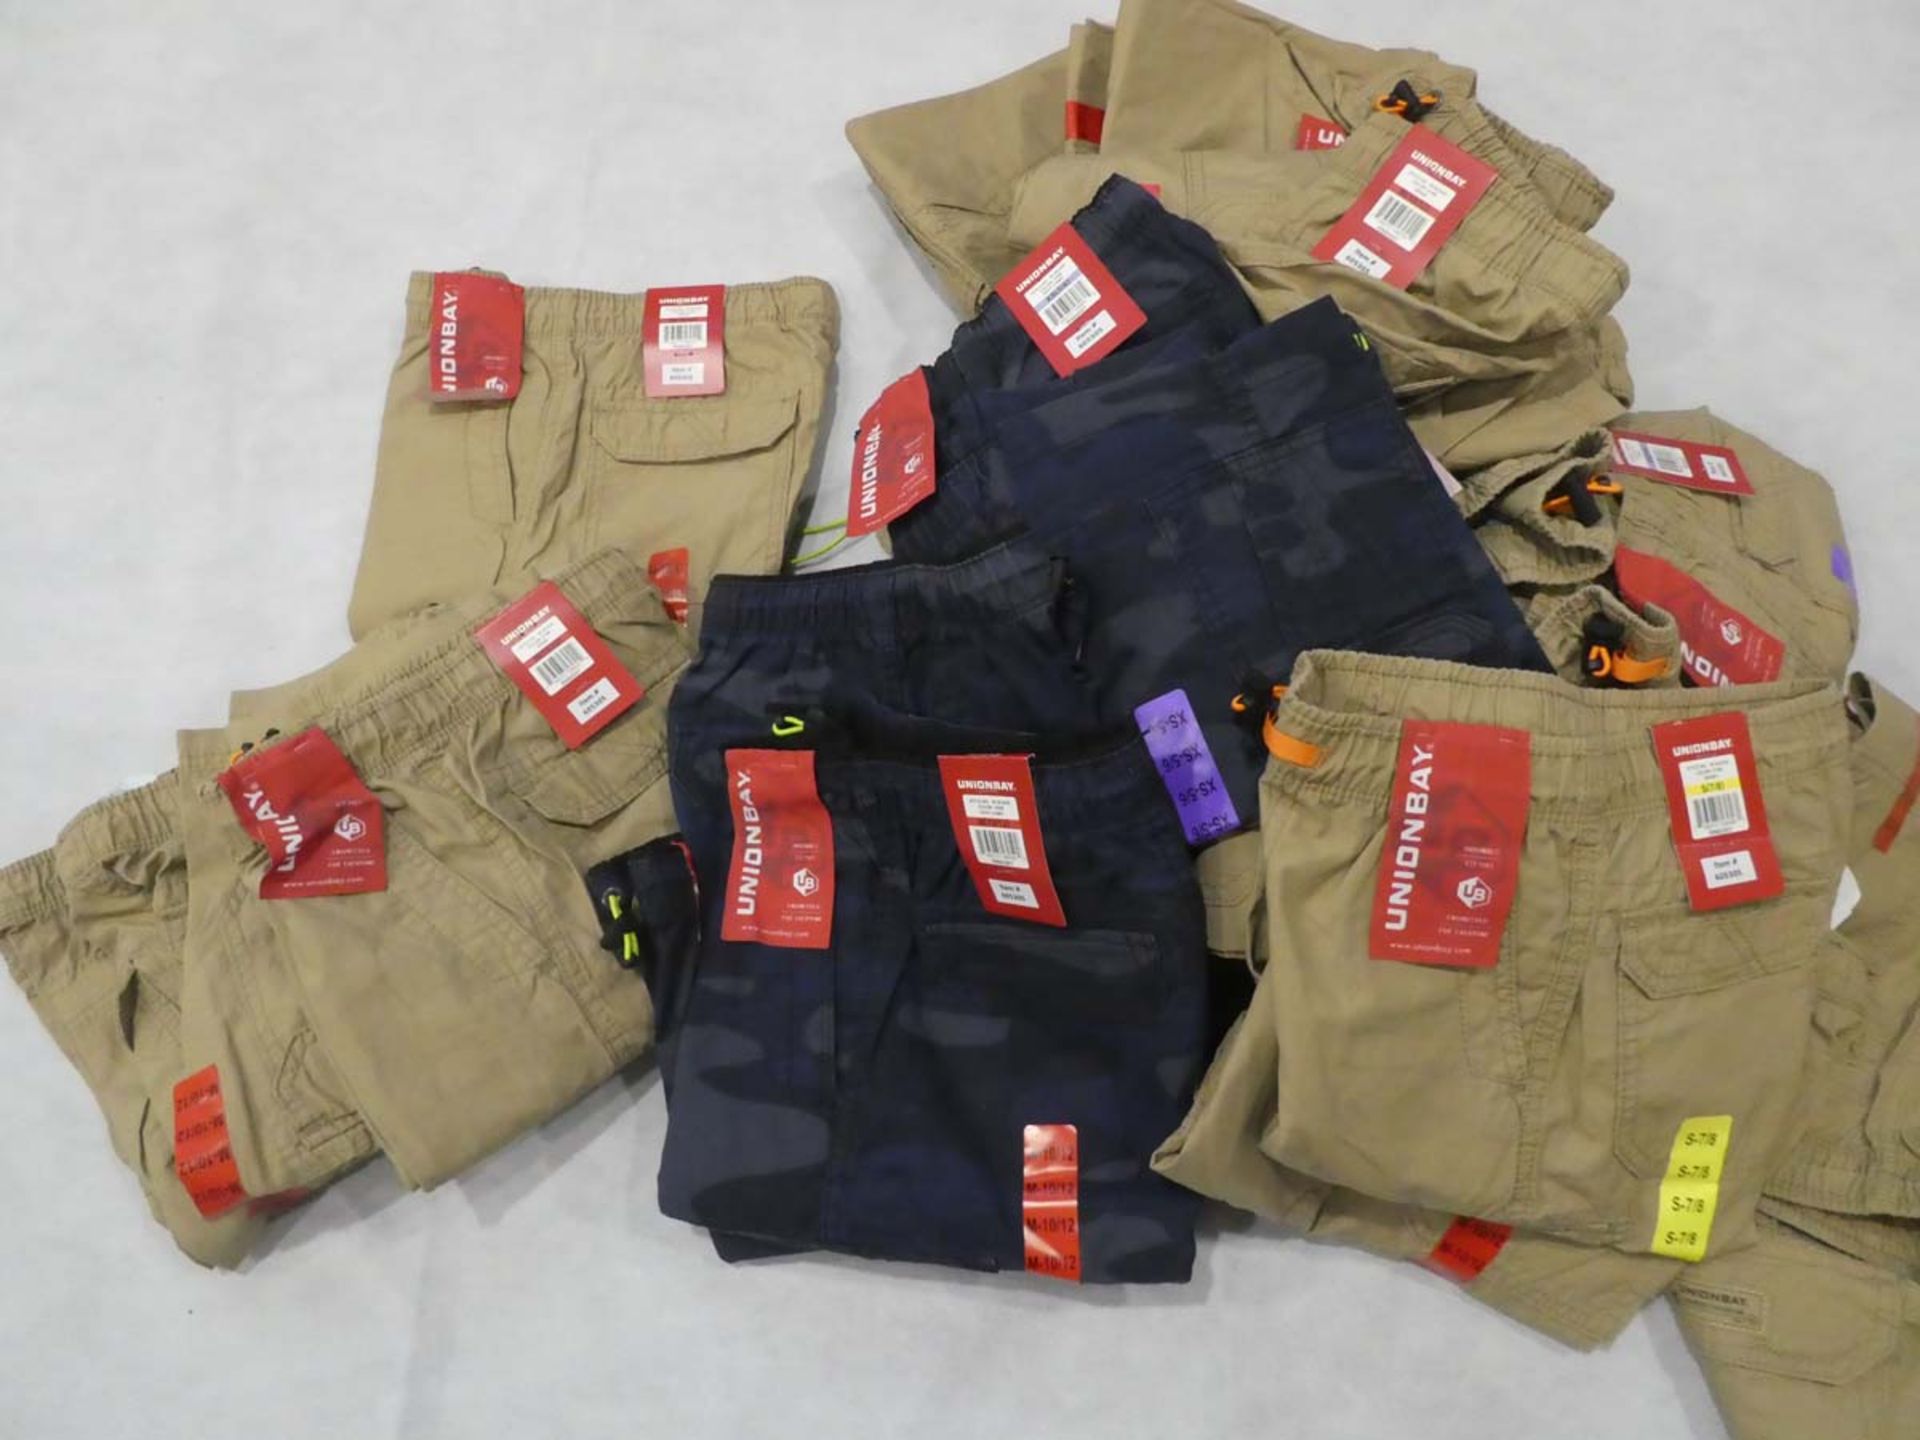 Selection of Unionbay originals shorts in grain and navy various sizes